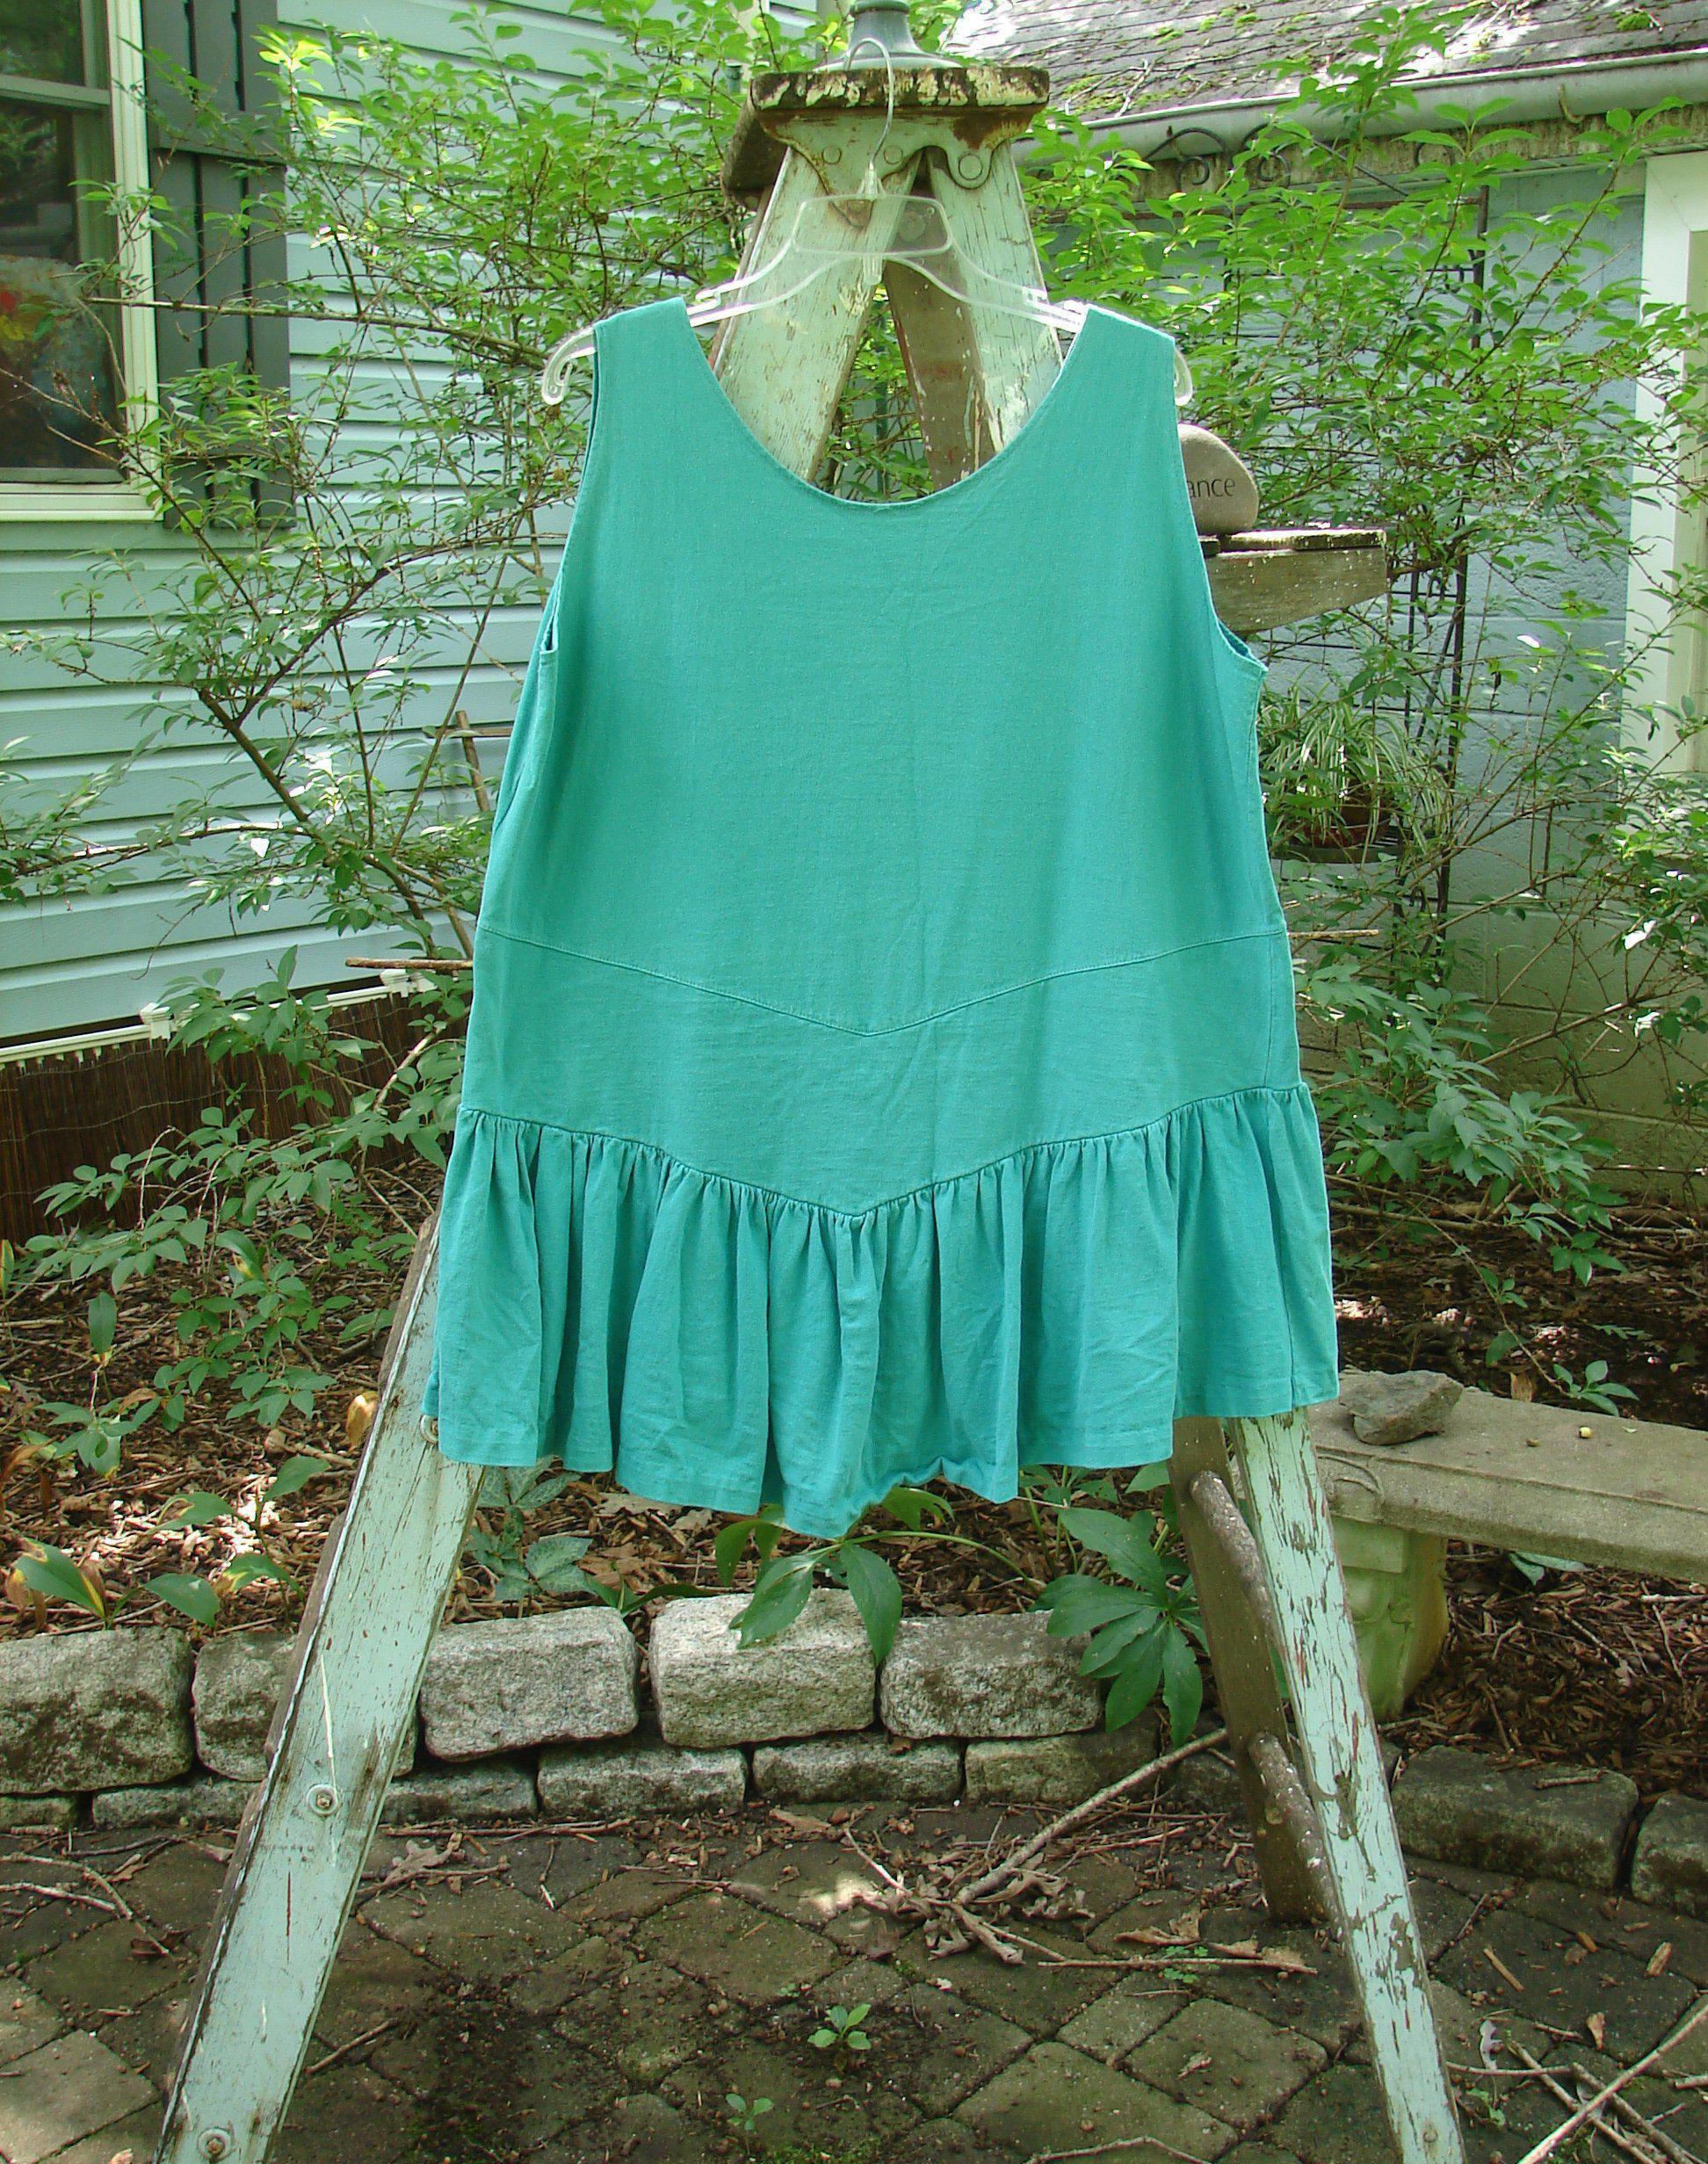 Image alt text: "1990 Button Tier Top in Turq, a blue dress with a gathered flounce and ruffled hemline on a clothes rack"